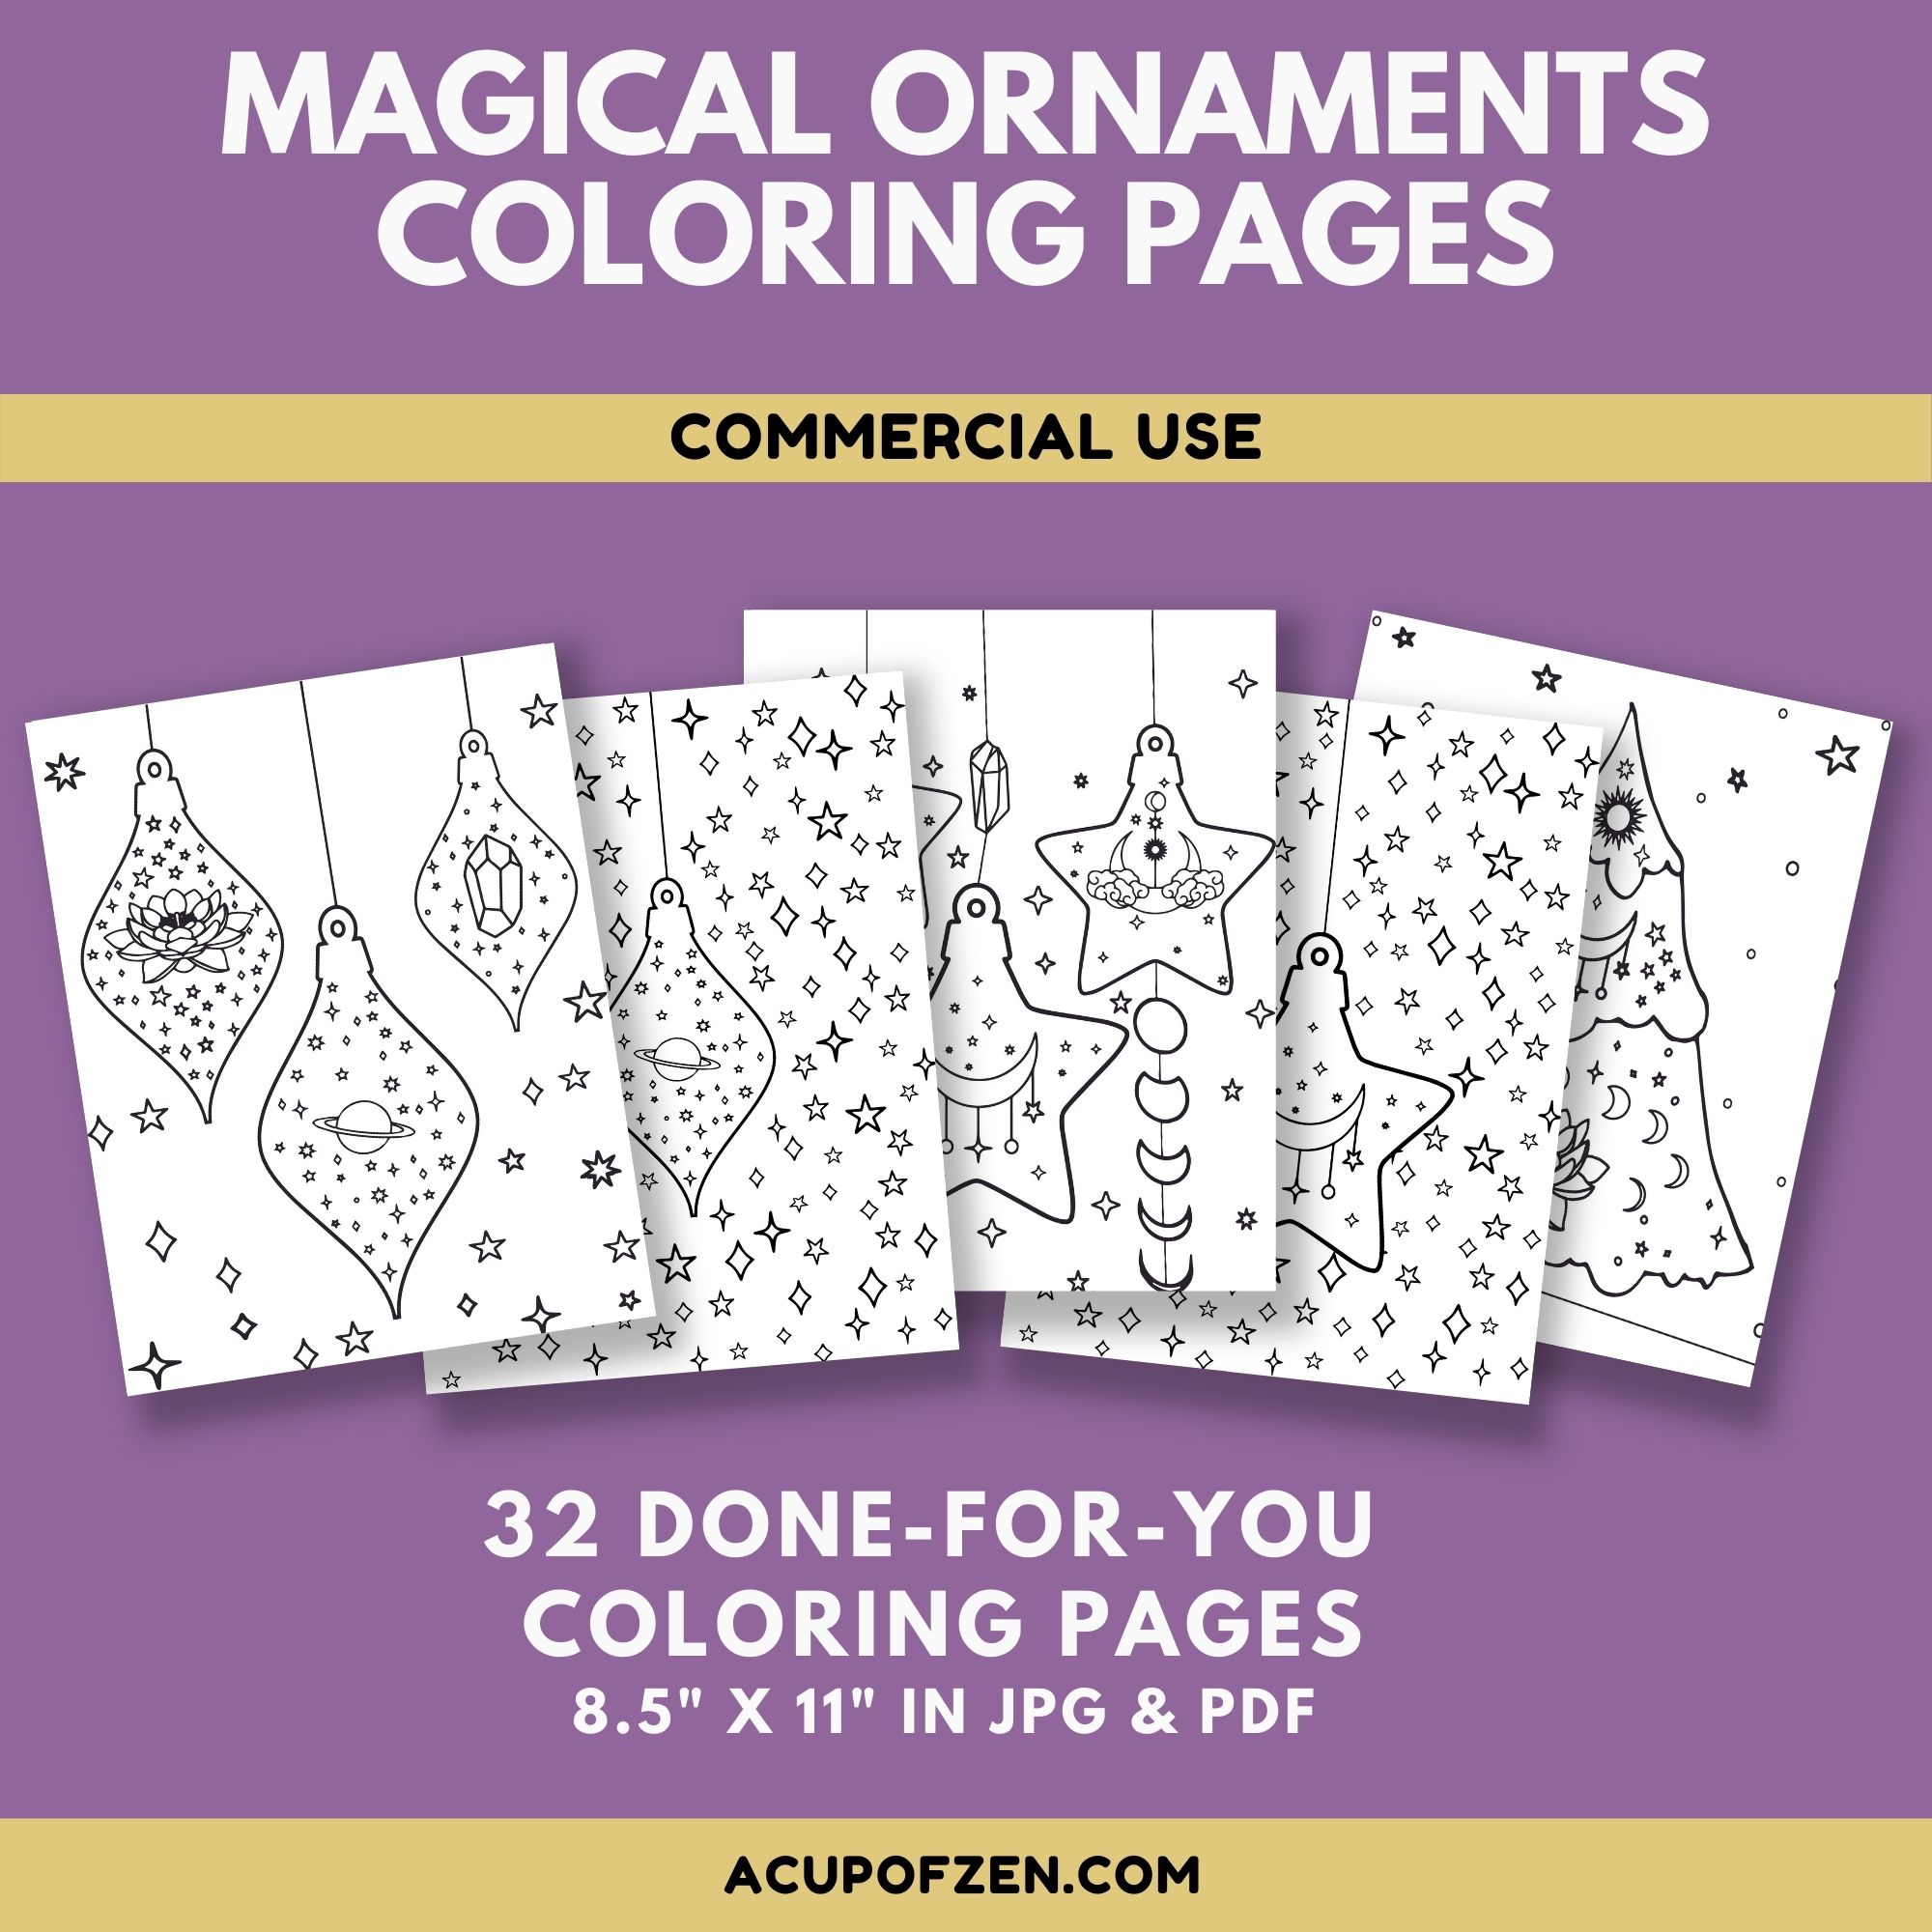 Magical Ornaments Coloring Pages